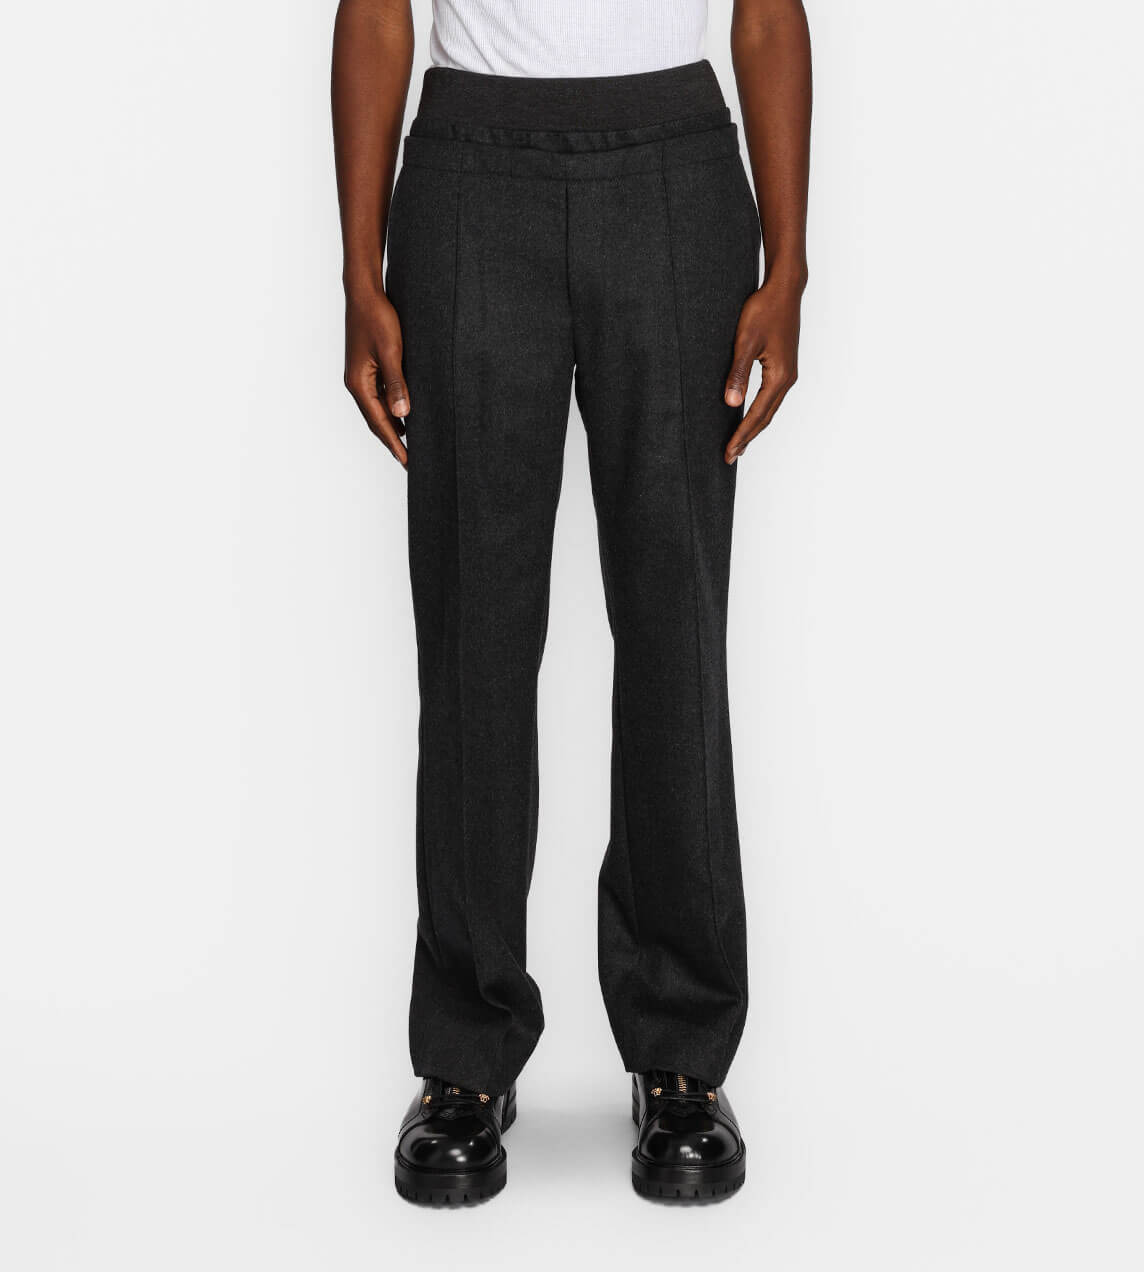 System - Pressed Crease Trouser Charcoal Grey